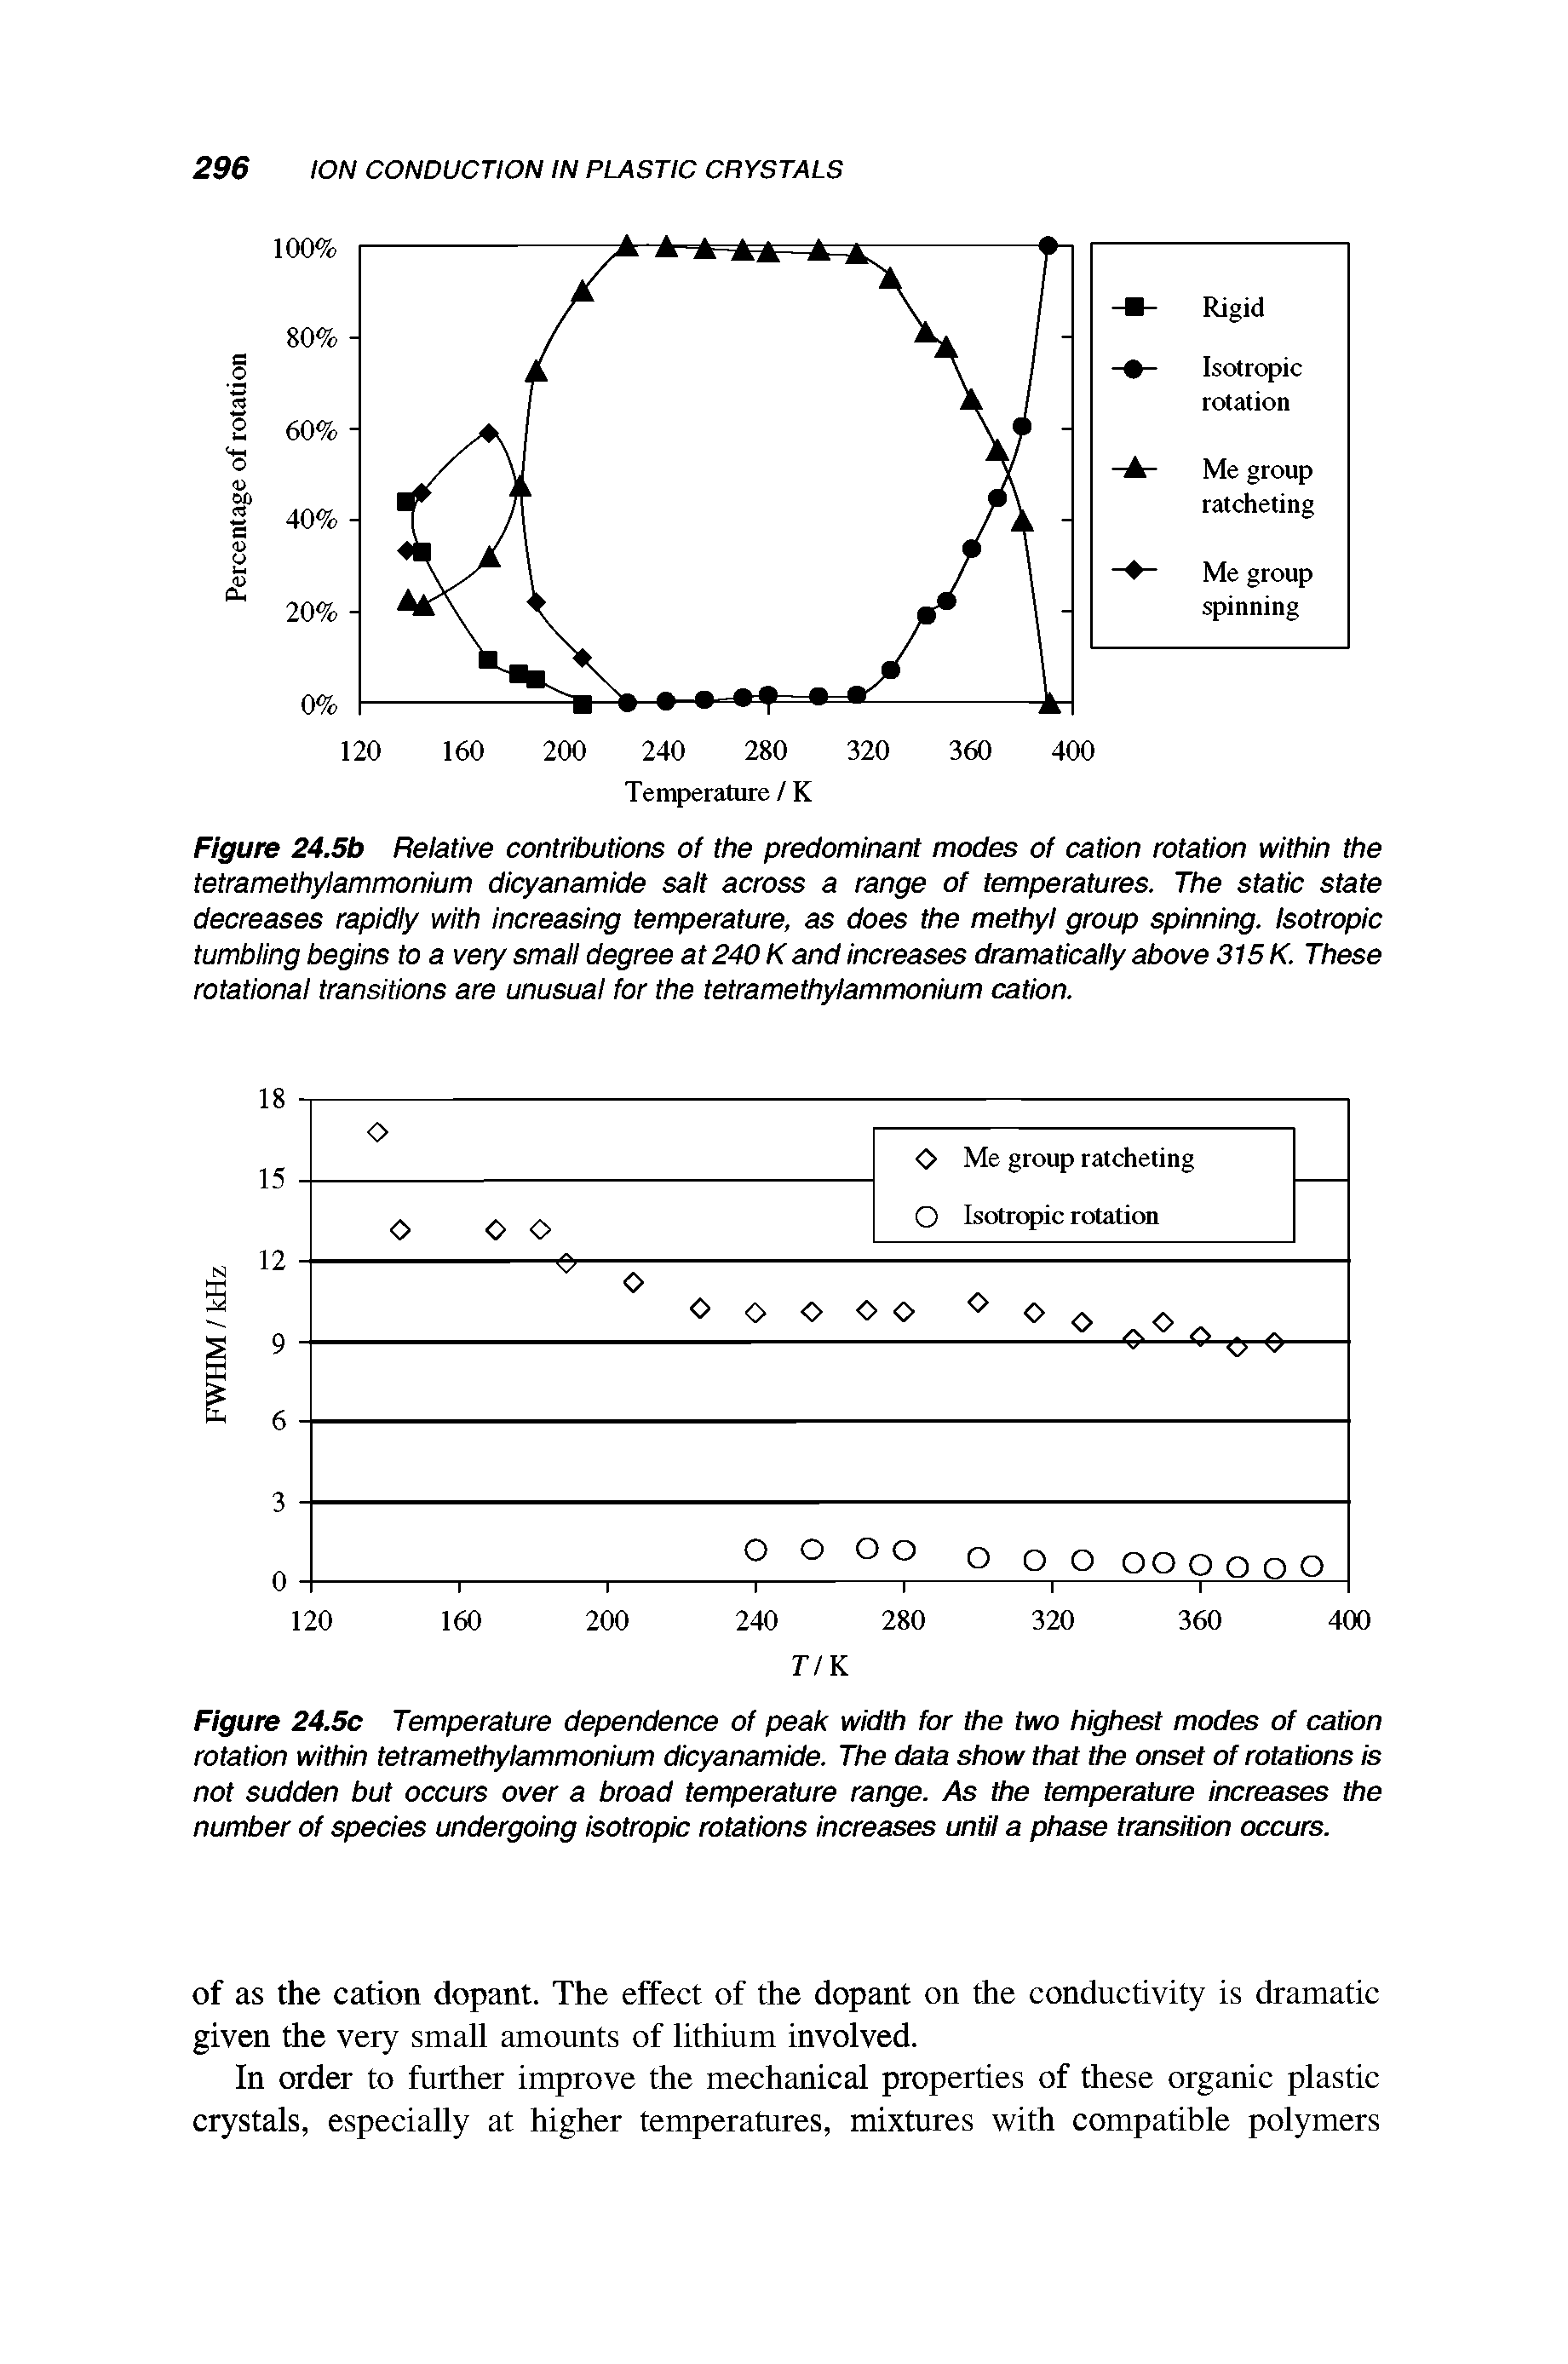 Figure 24.5c Temperature dependence of peak width for the two highest modes of cation rotation within tetramethylammonium dicyanamide. The data show that the onset of rotations is not sudden but occurs over a broad temperature range. As the temperature increases the number of species undergoing isotropic rotations increases until a phase treinsition occurs.